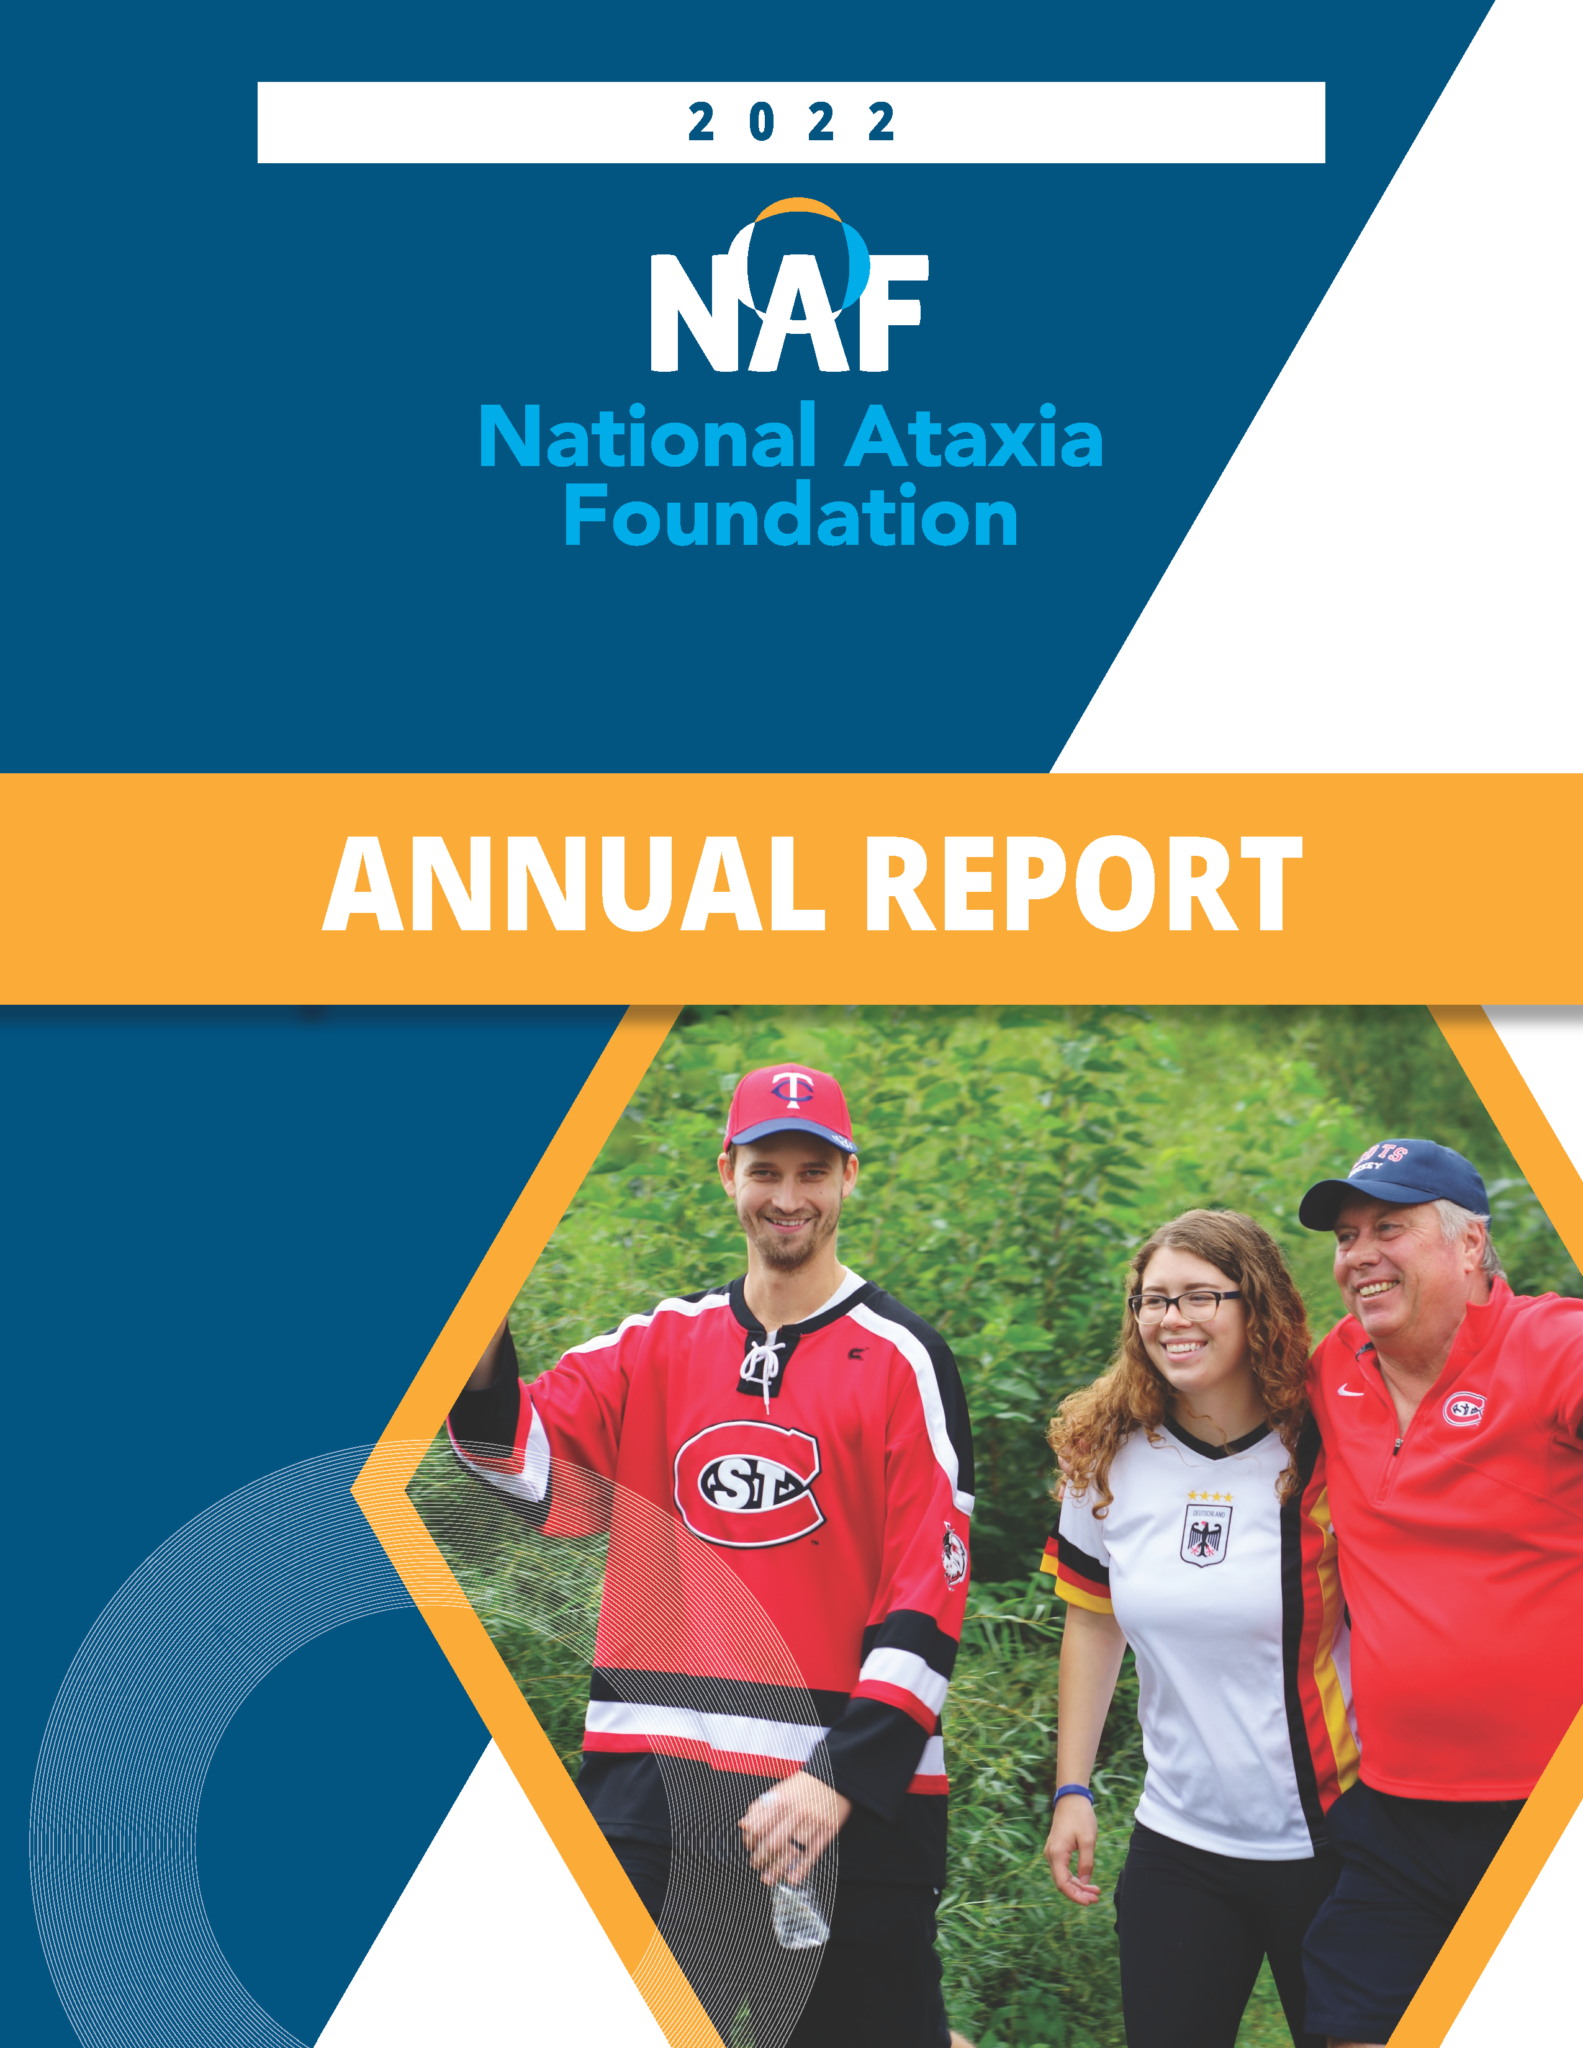 About NAF National Ataxia Foundation